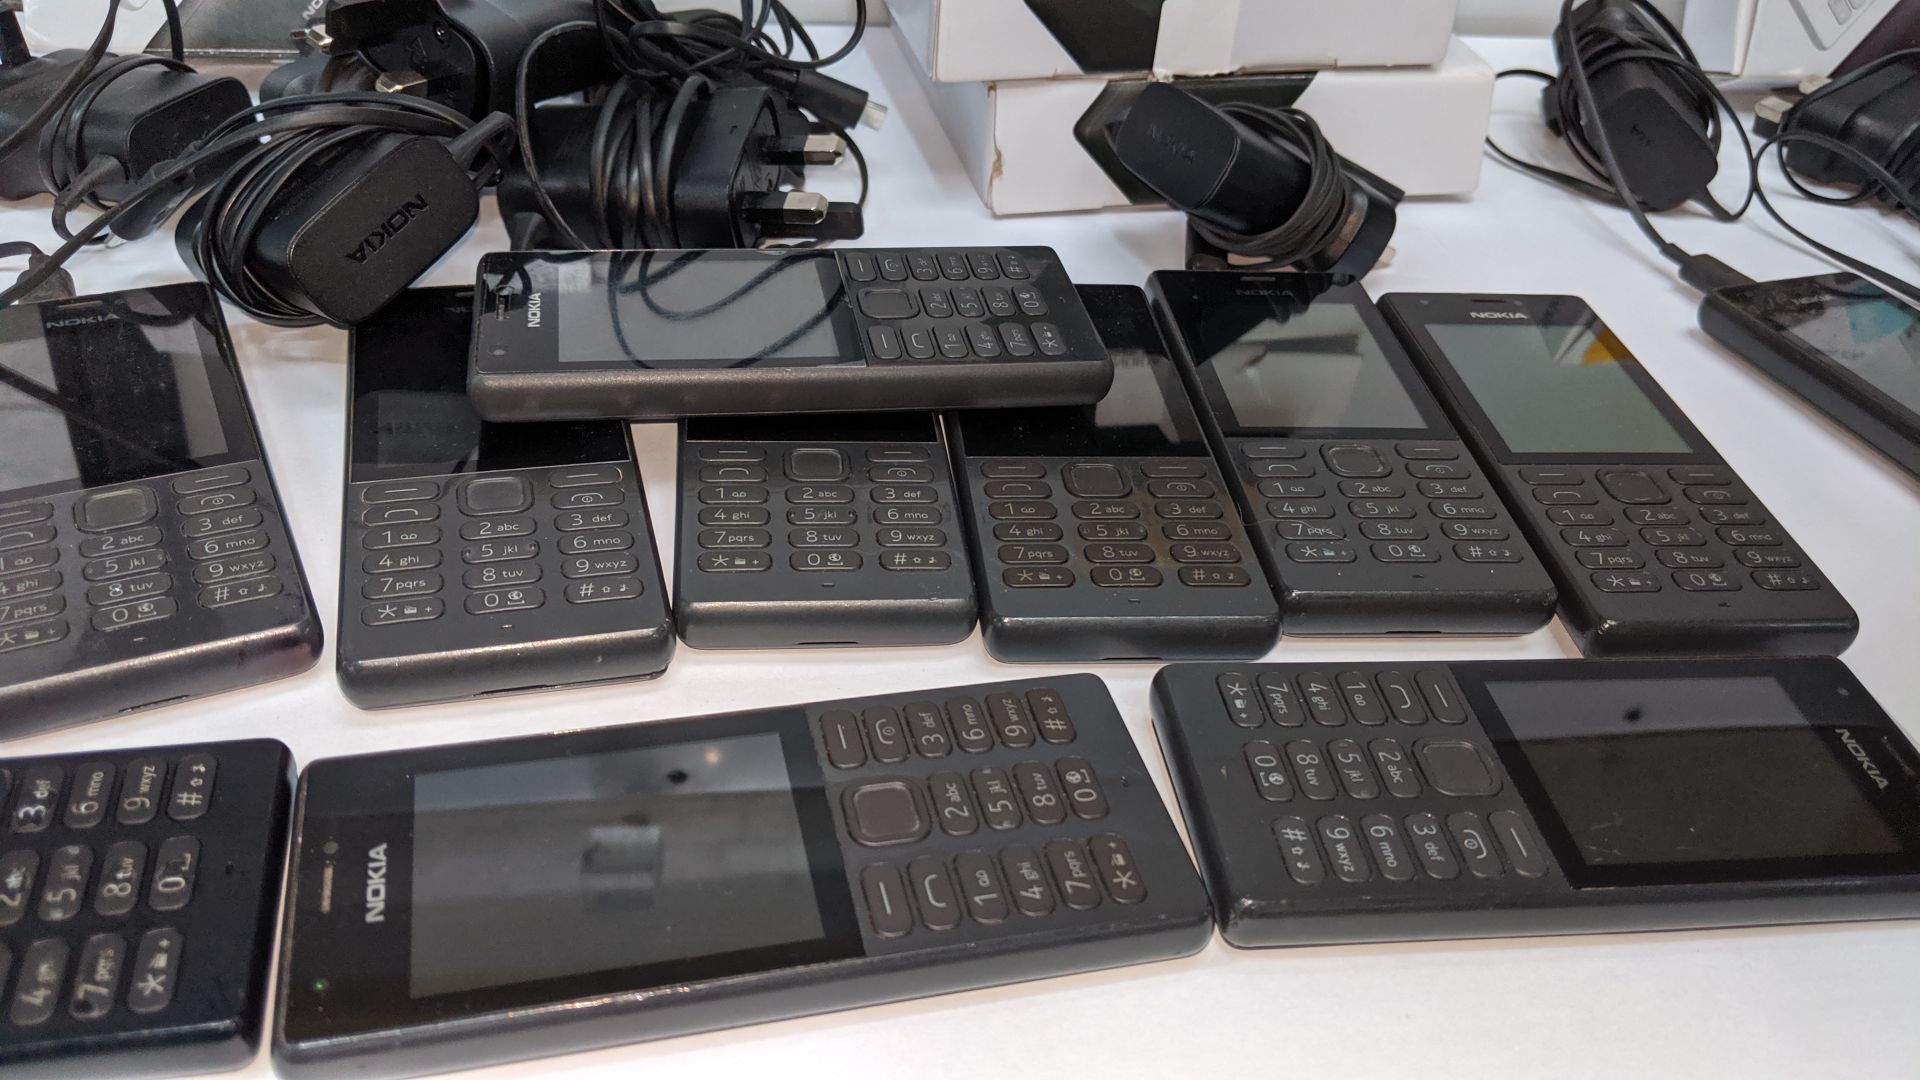 11 off Nokia 216 black mobile phones including 7 chargers & 5 boxes. We believe these phones were - Image 4 of 7